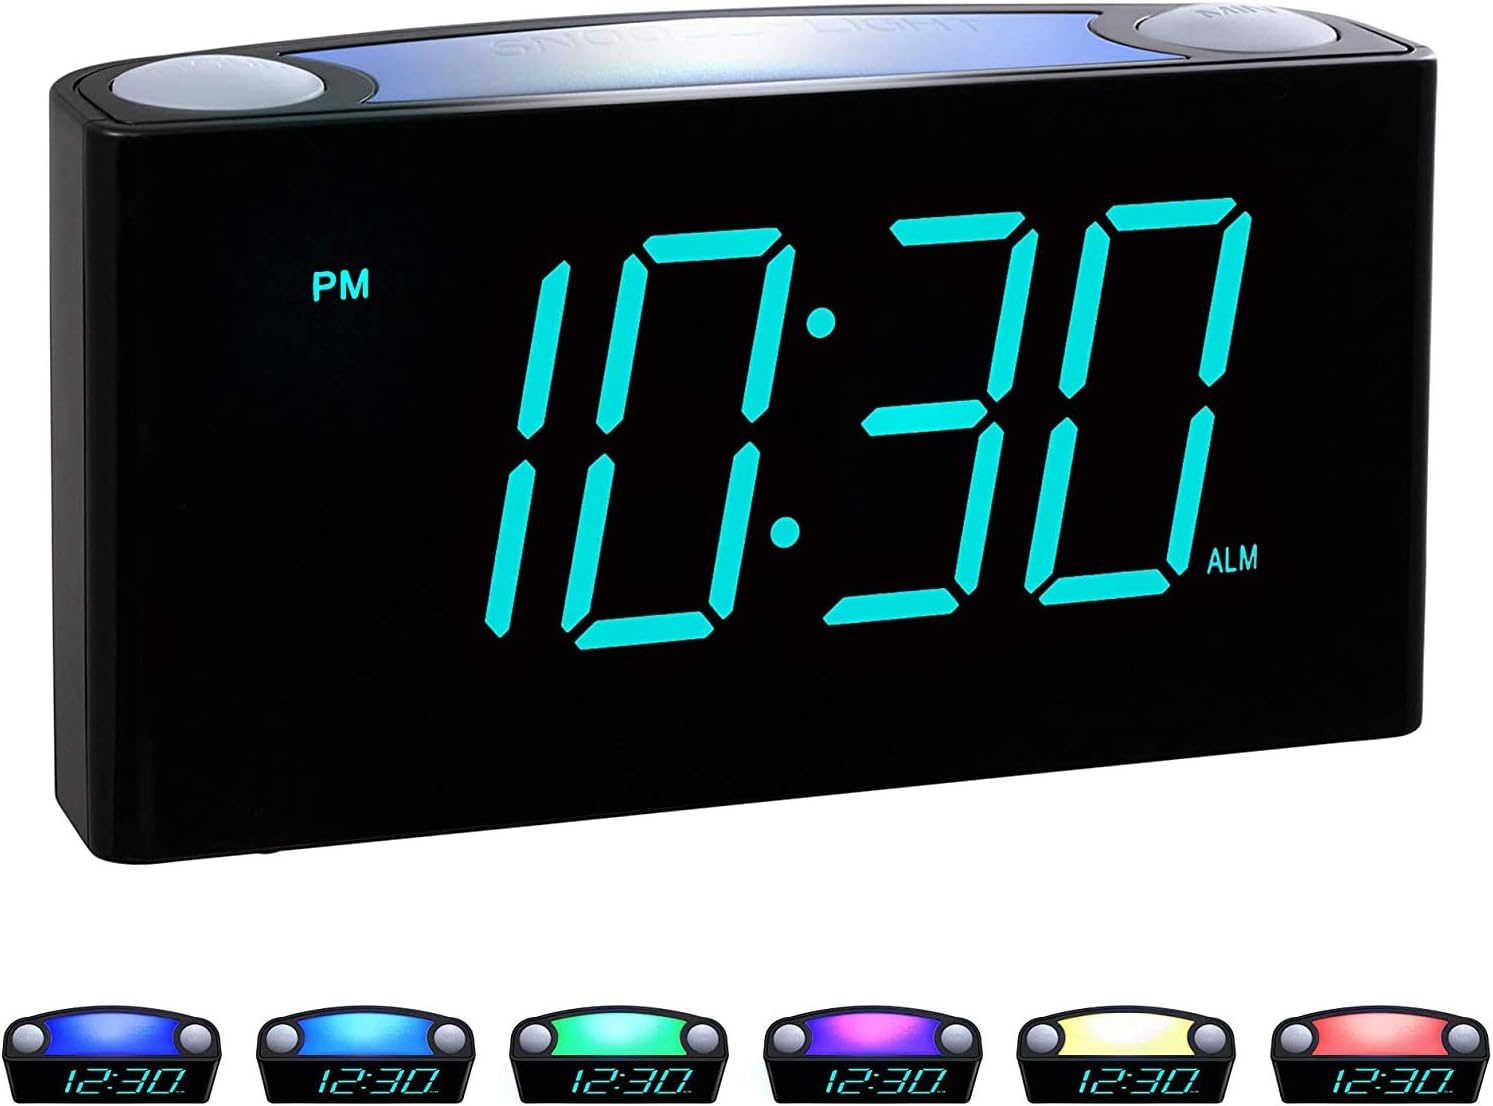 Rocam Digital Alarm Clock for Bedrooms - Large 7" LED Display with Dimmer, Snooze, 7 Color Night Light, Easy to Set, USB Chargers, Battery Backup, 12/24 Hour for Kids, Boys, Heavy Sleepers(Blue)